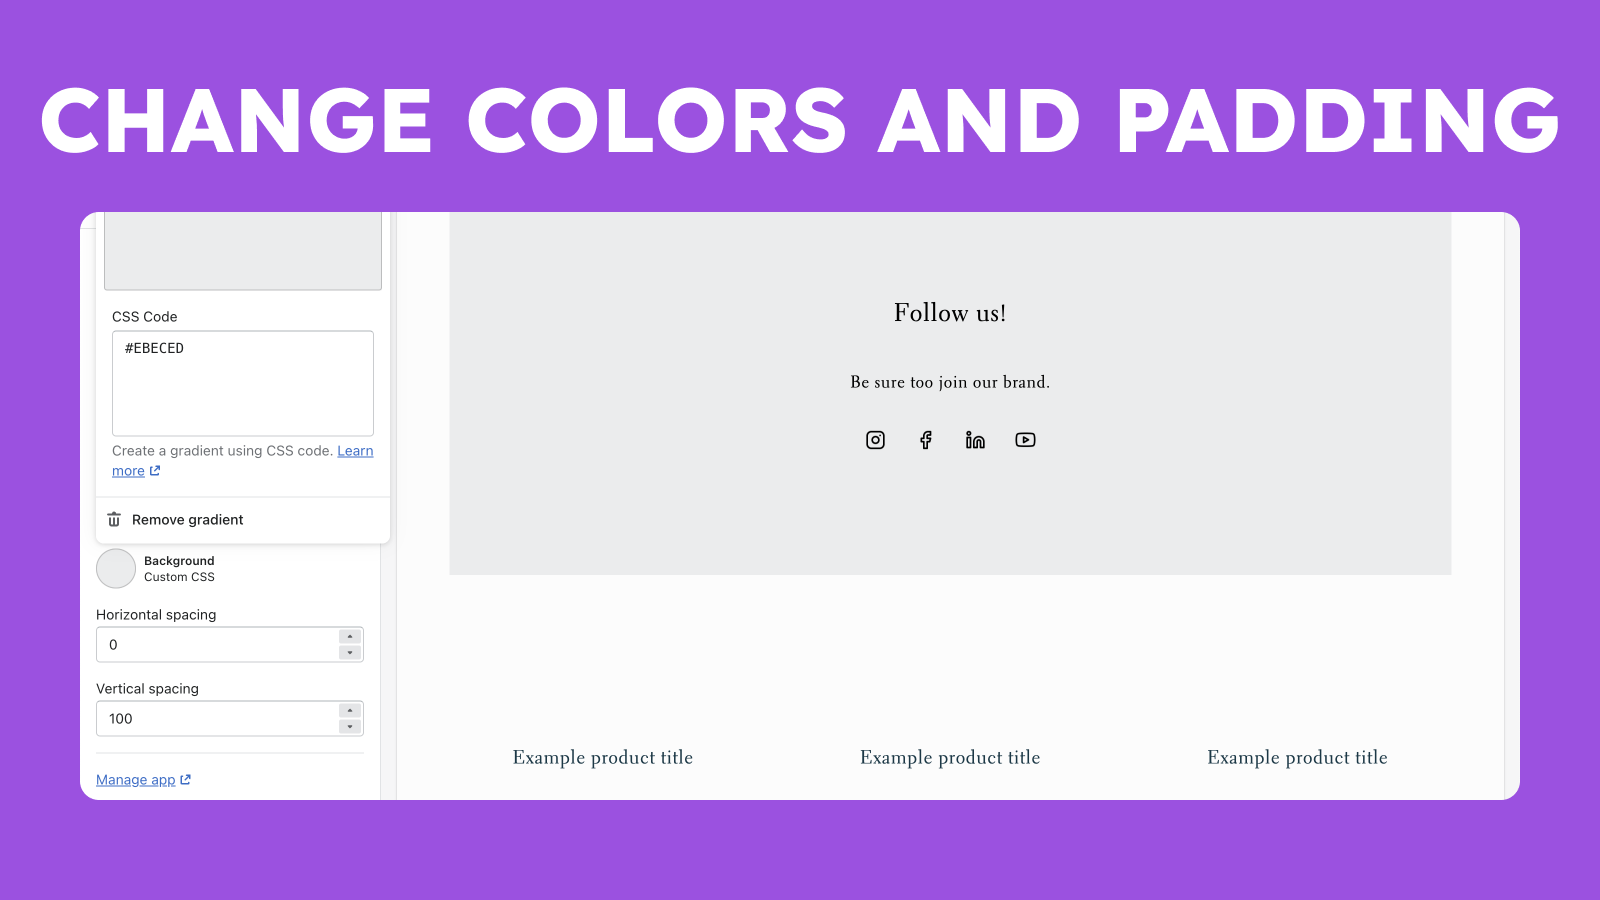 Floox Social Networks Easy app - Color and padding management